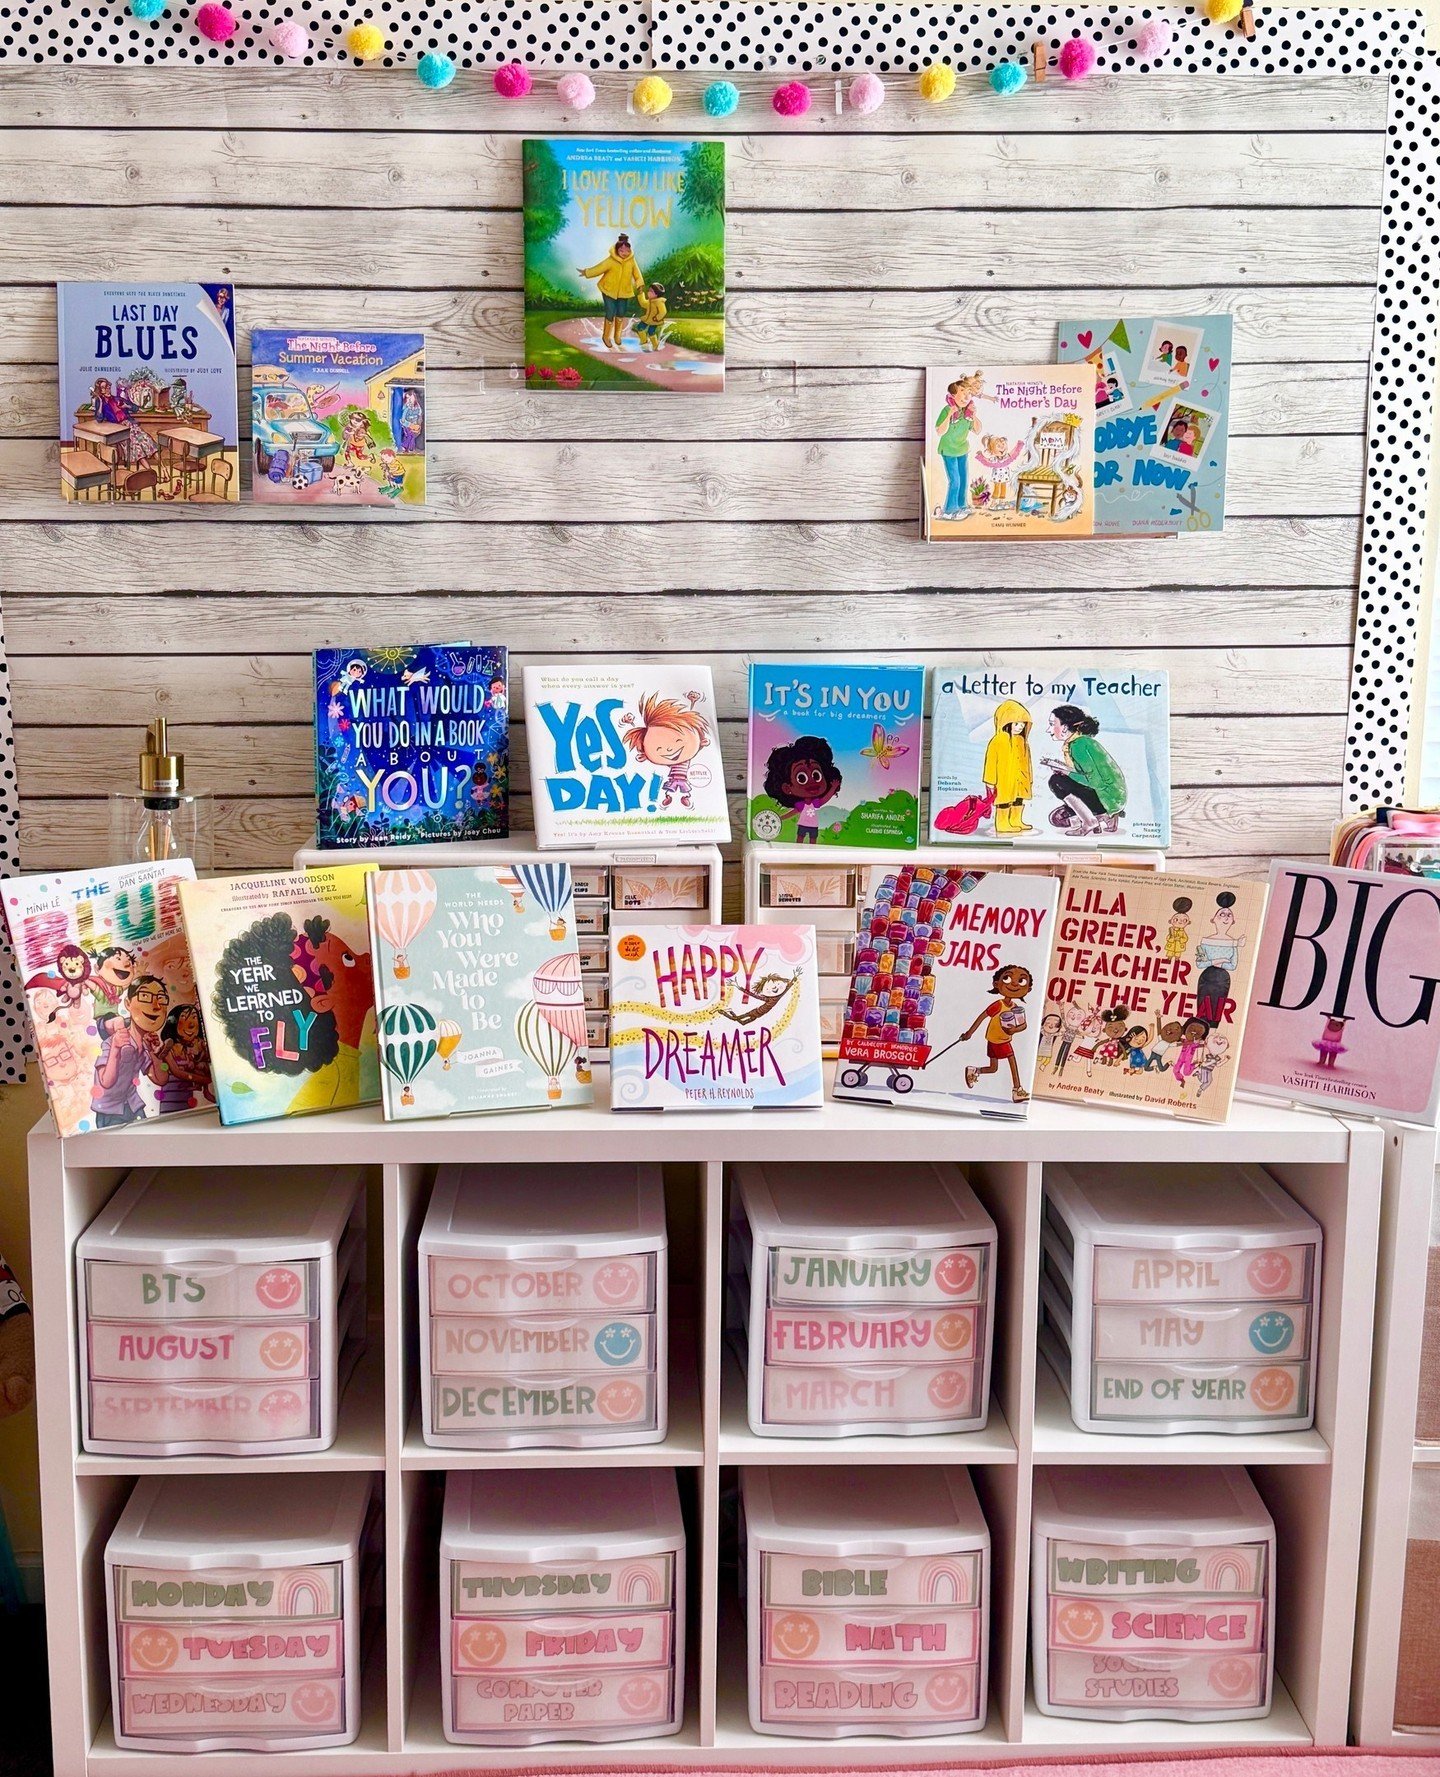 🤯It&rsquo;s gonna be MAY! Sharing all my May picture books with you. 

💕One of my favorite books to read in May is written by my girl Madison, @sweetfirstiefun &ldquo;

🤯May is just around the corner! Let me share with you all the wonderful pictur